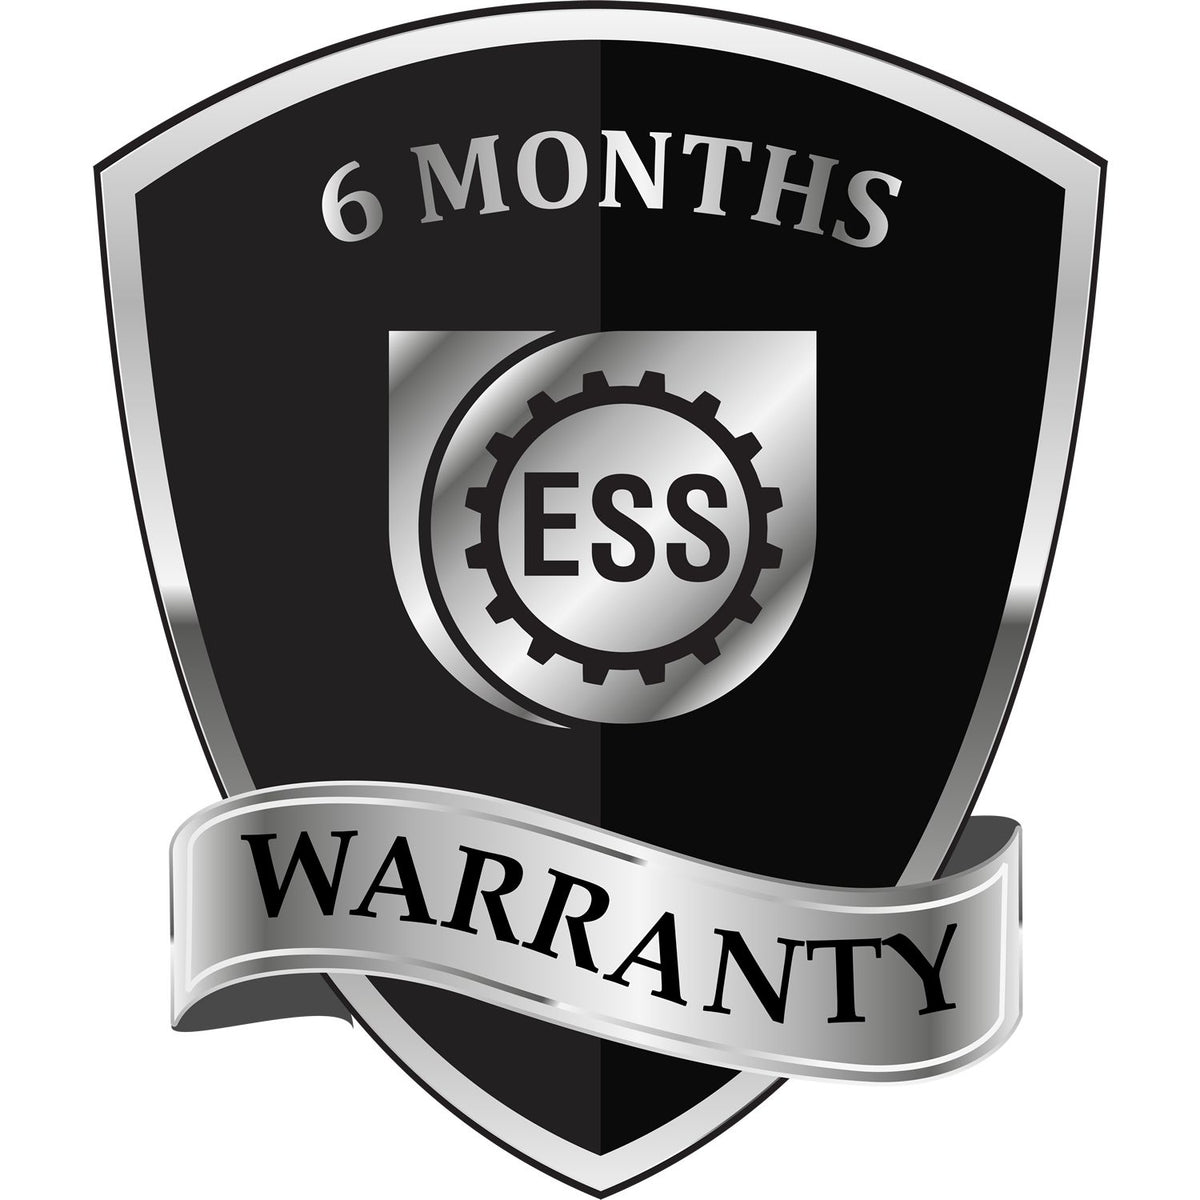 A badge or emblem showing a warranty icon for the Hawaii Professional Engineer Seal Stamp